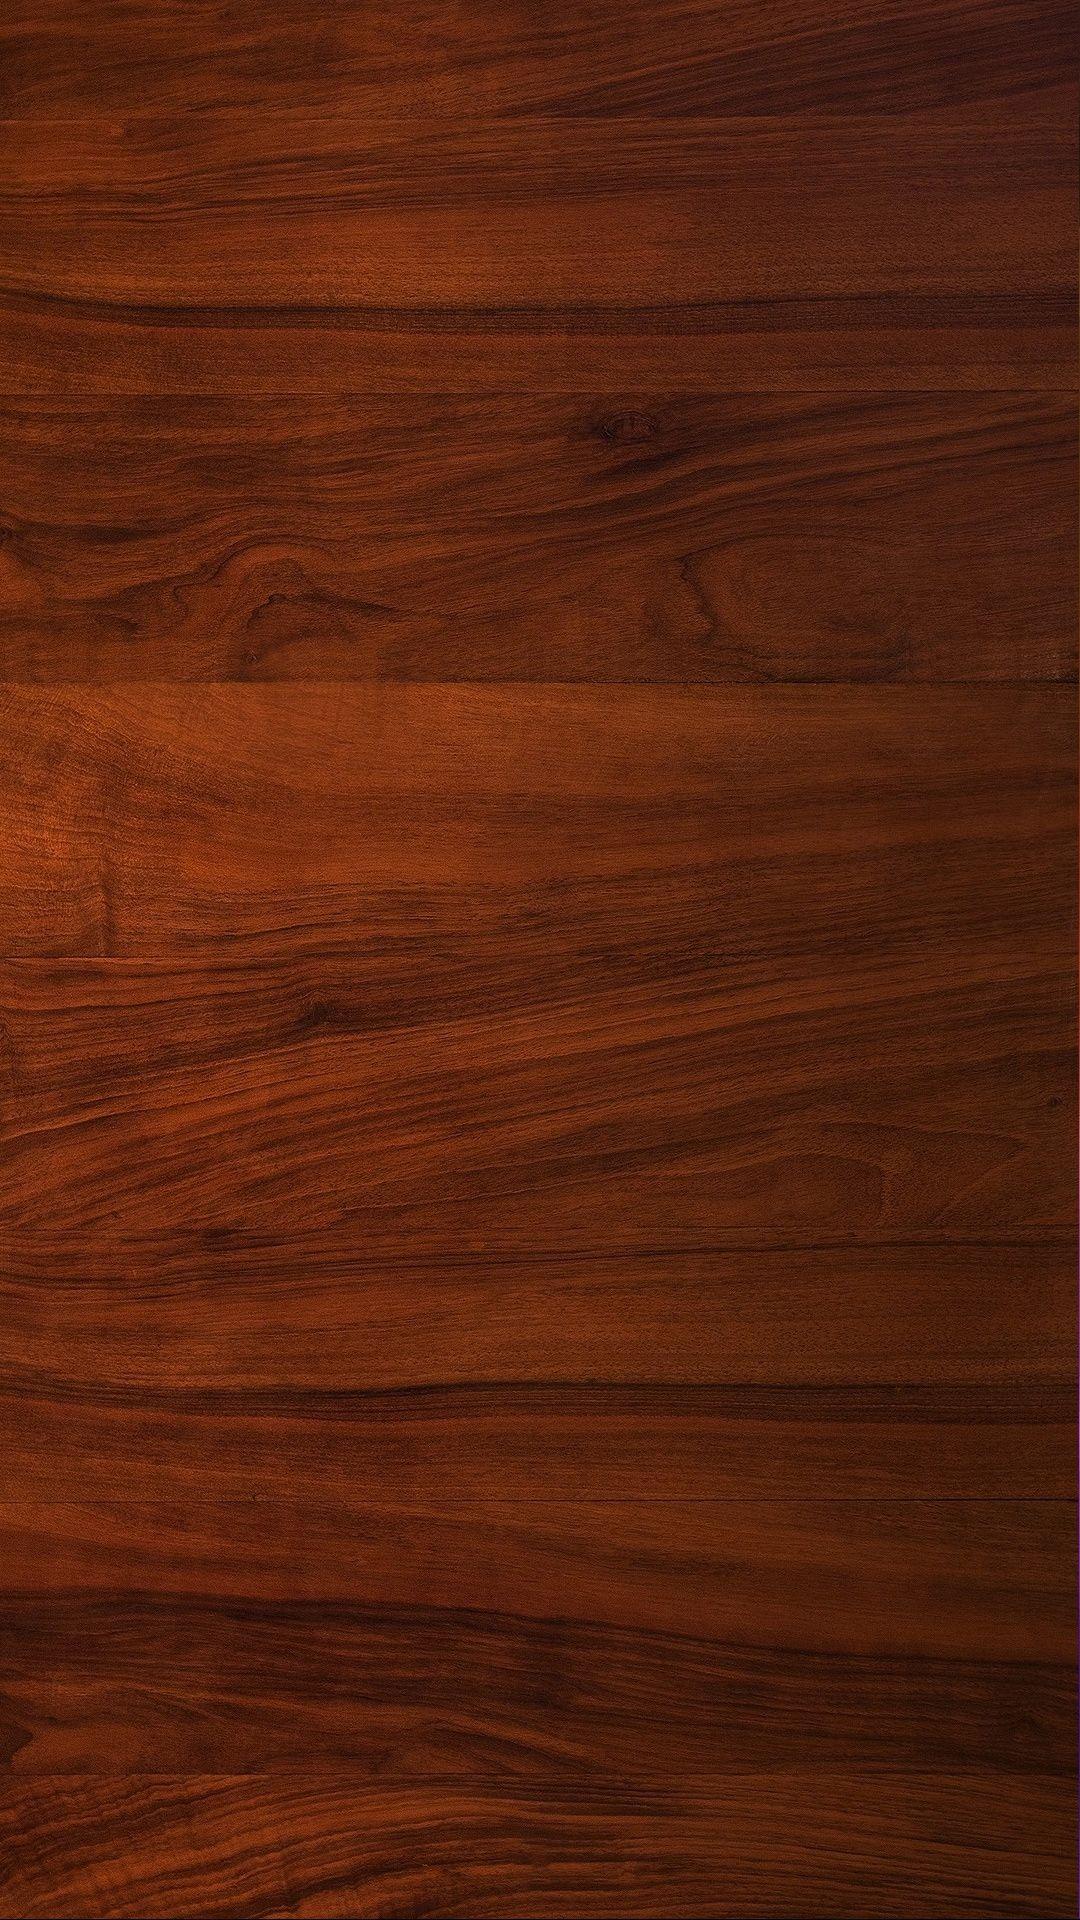 Cherry Wood Pattern Texture Android Wallpaper free download